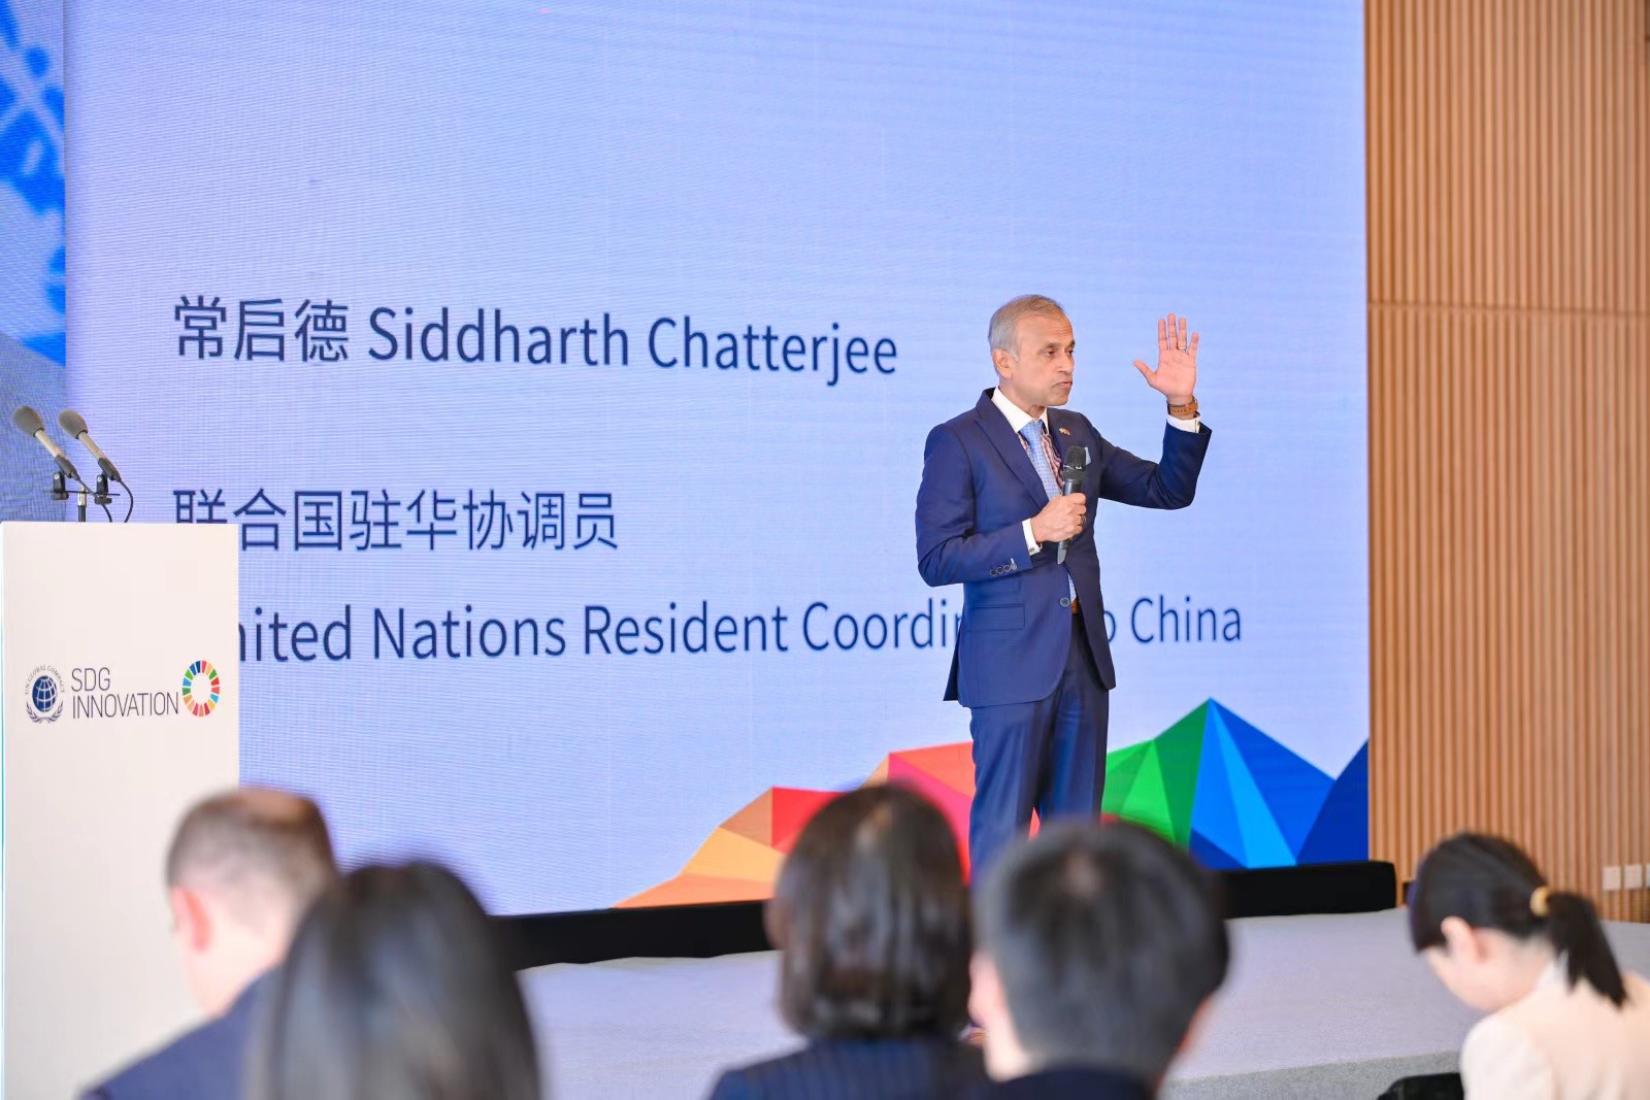  UN Resident Coordinator in China Siddharth Chatterjee at the closing ceremony of the SDG Innovation Accelerator Programme